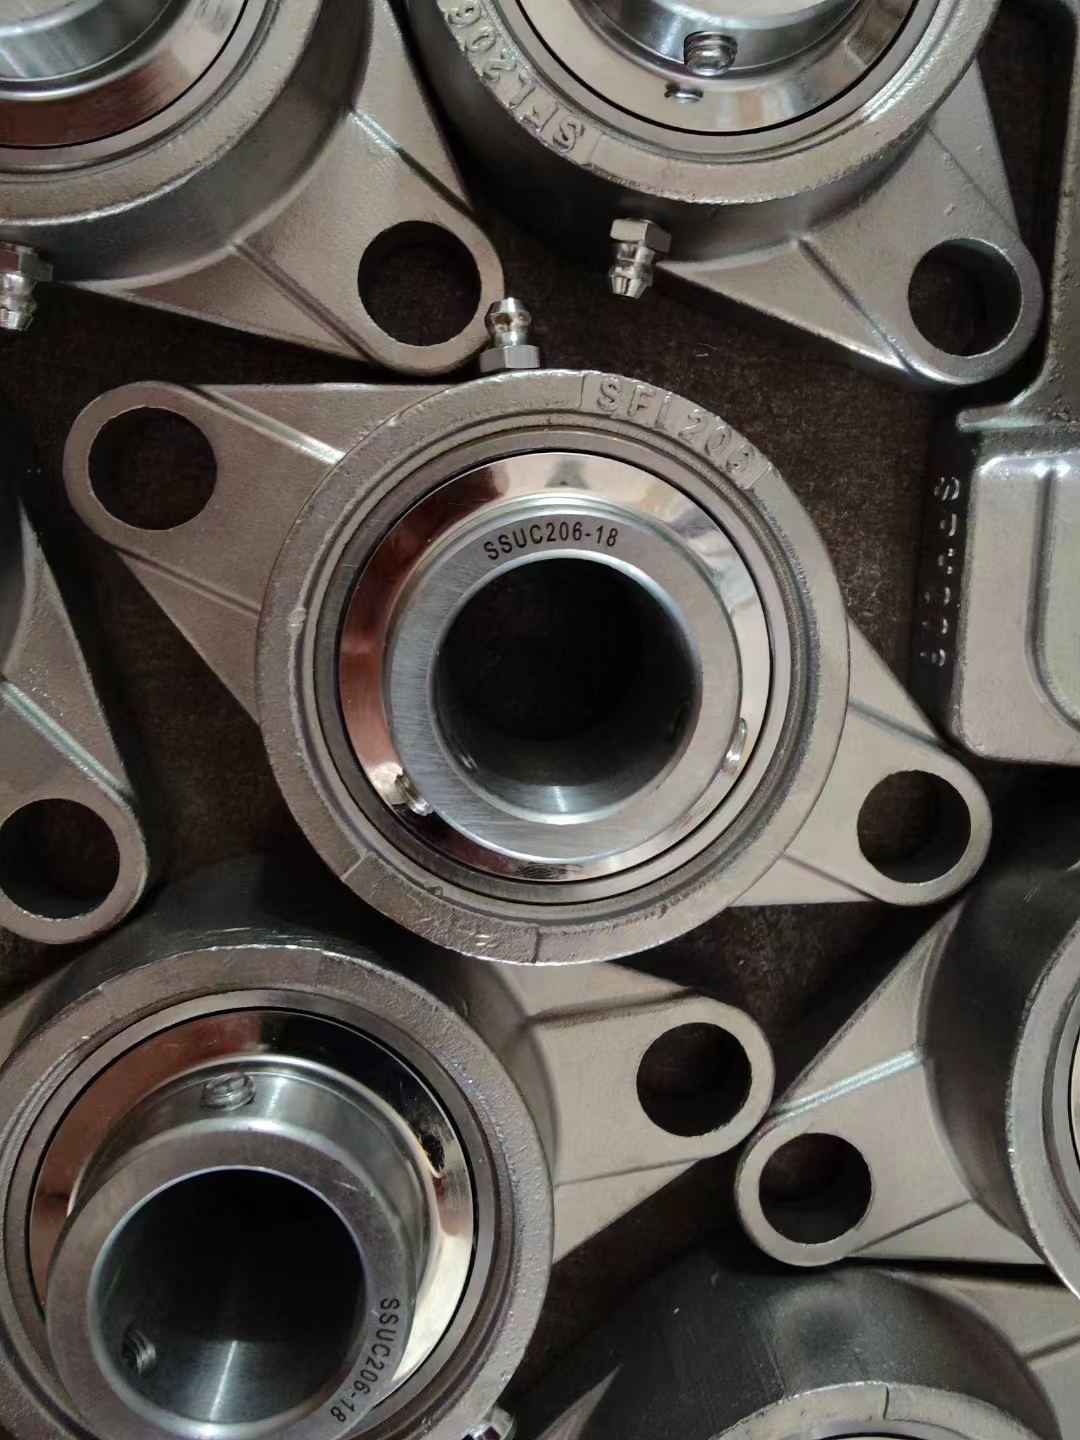 Stainless steel outer spherical bearing